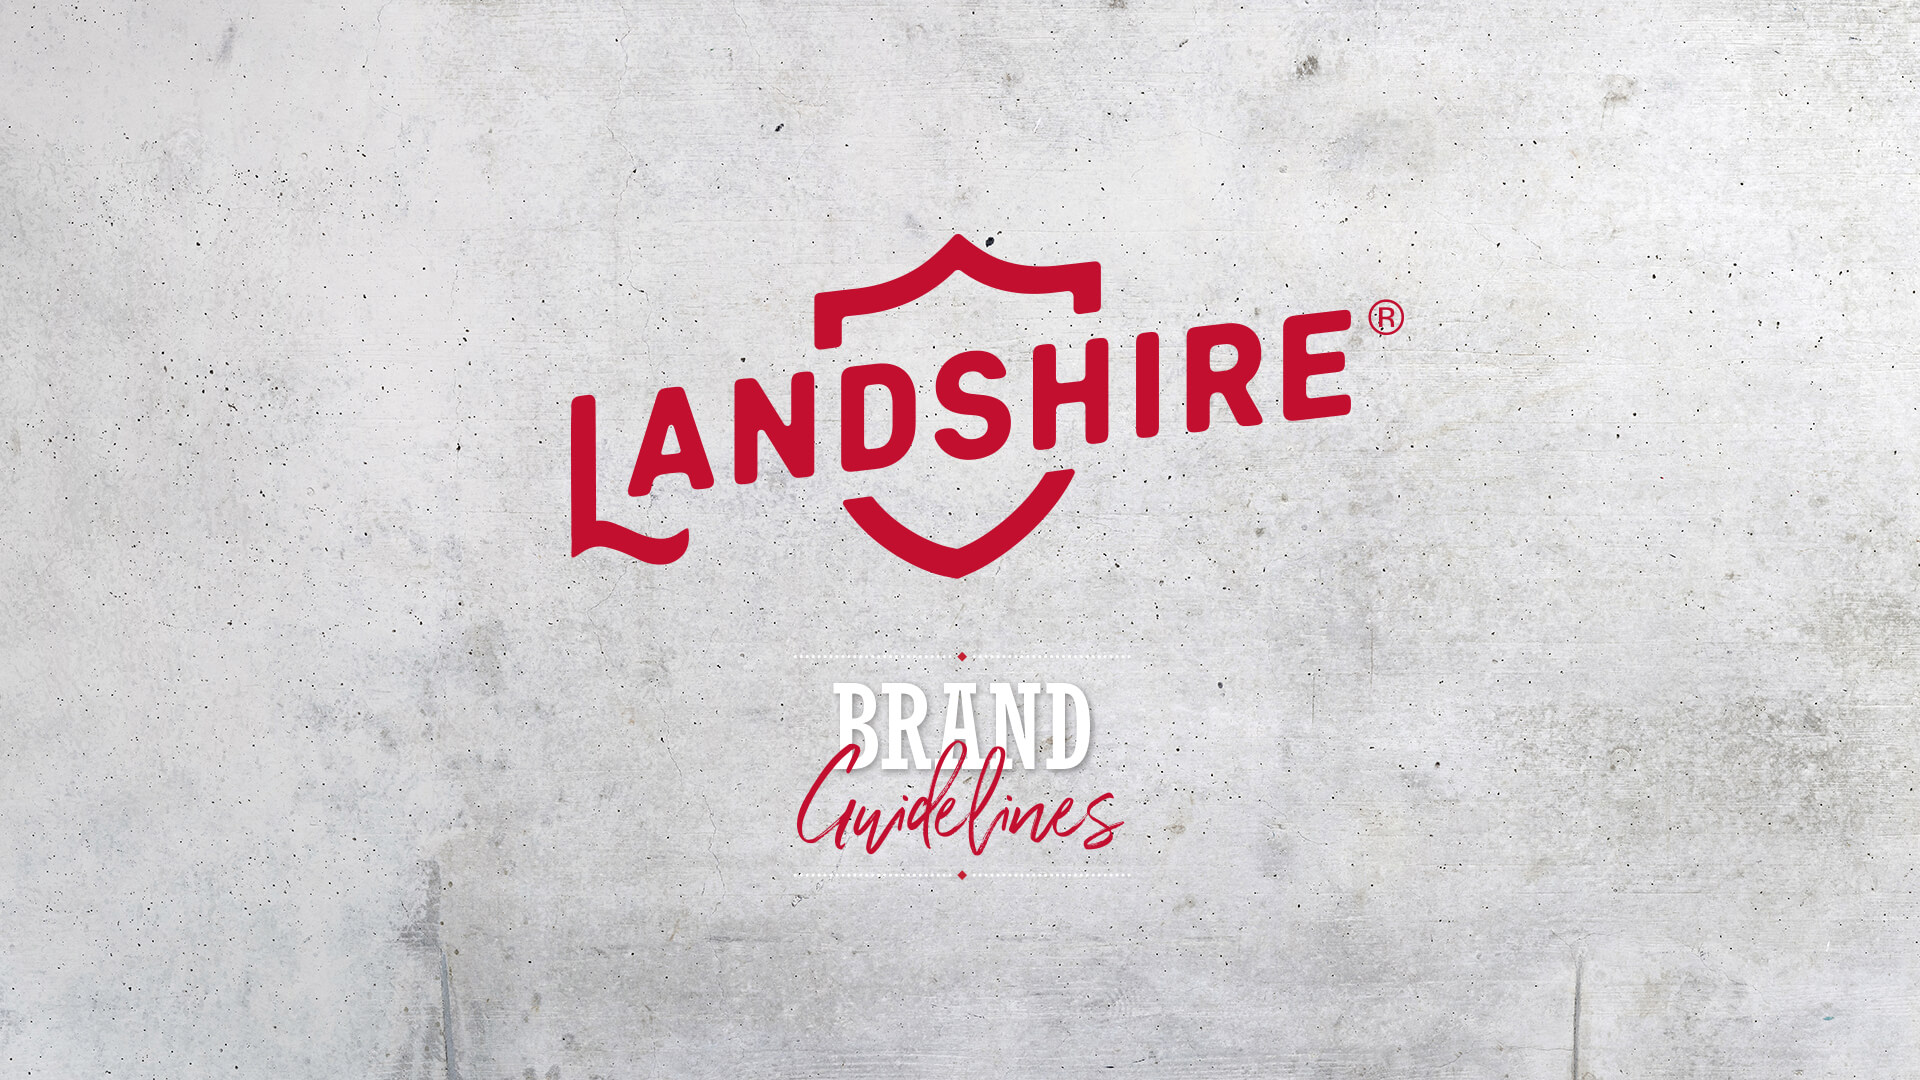 Landshire® Brand Guidelines Case Study